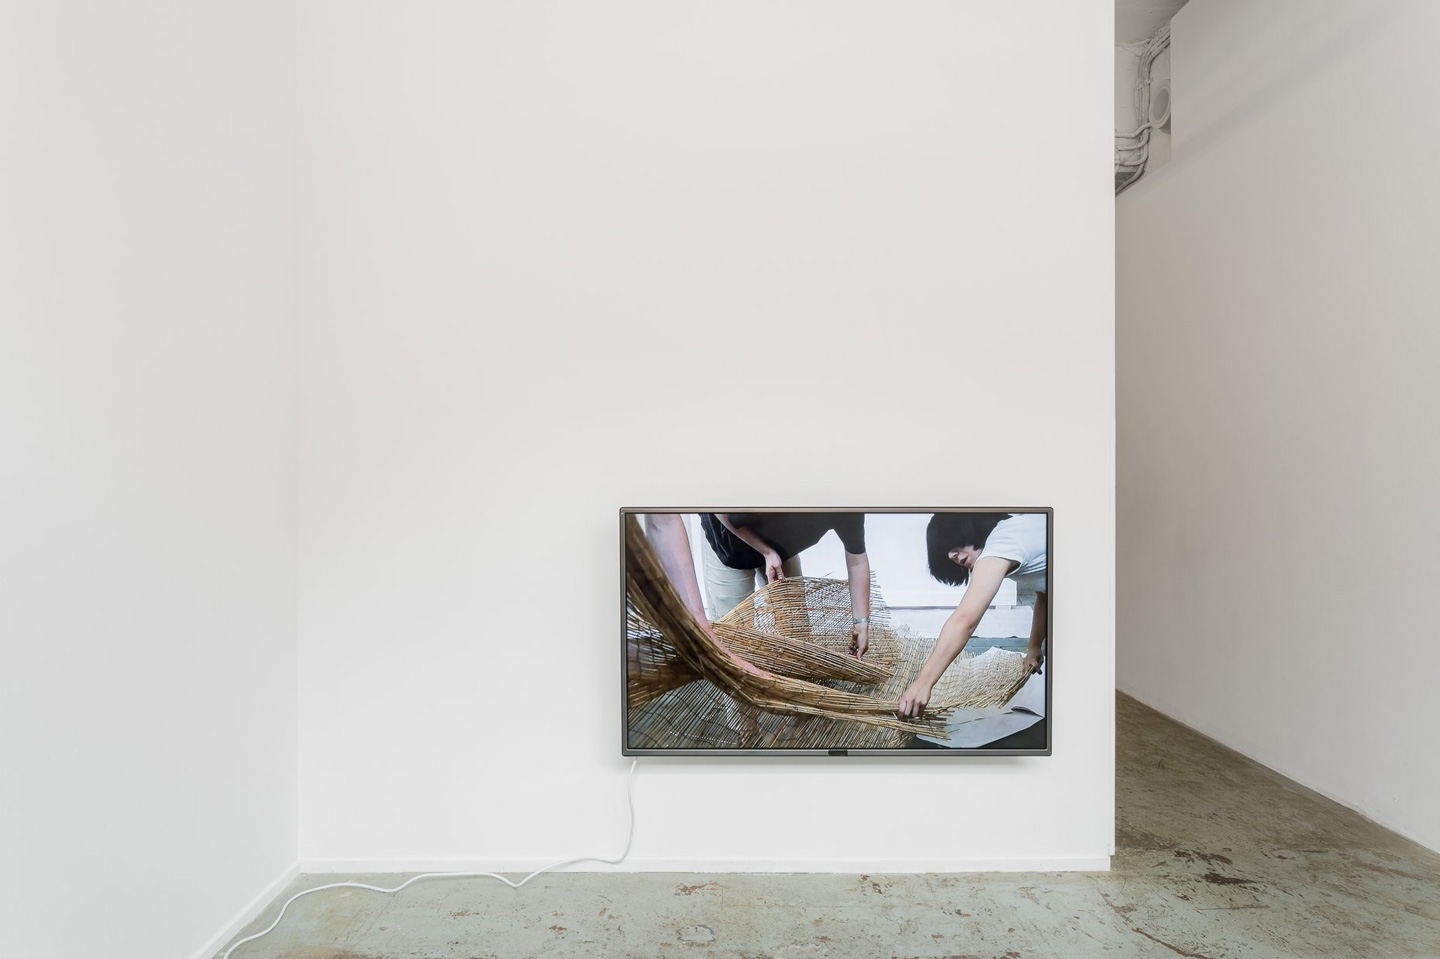 <p><em>Talking to the back of your head</em>, 2018, single channel high definition digital video, 11:29, continuous loop. Installation view, Bus Projects, Narrm (Melbourne), 2018. Photography: Christo Crocker.</p>